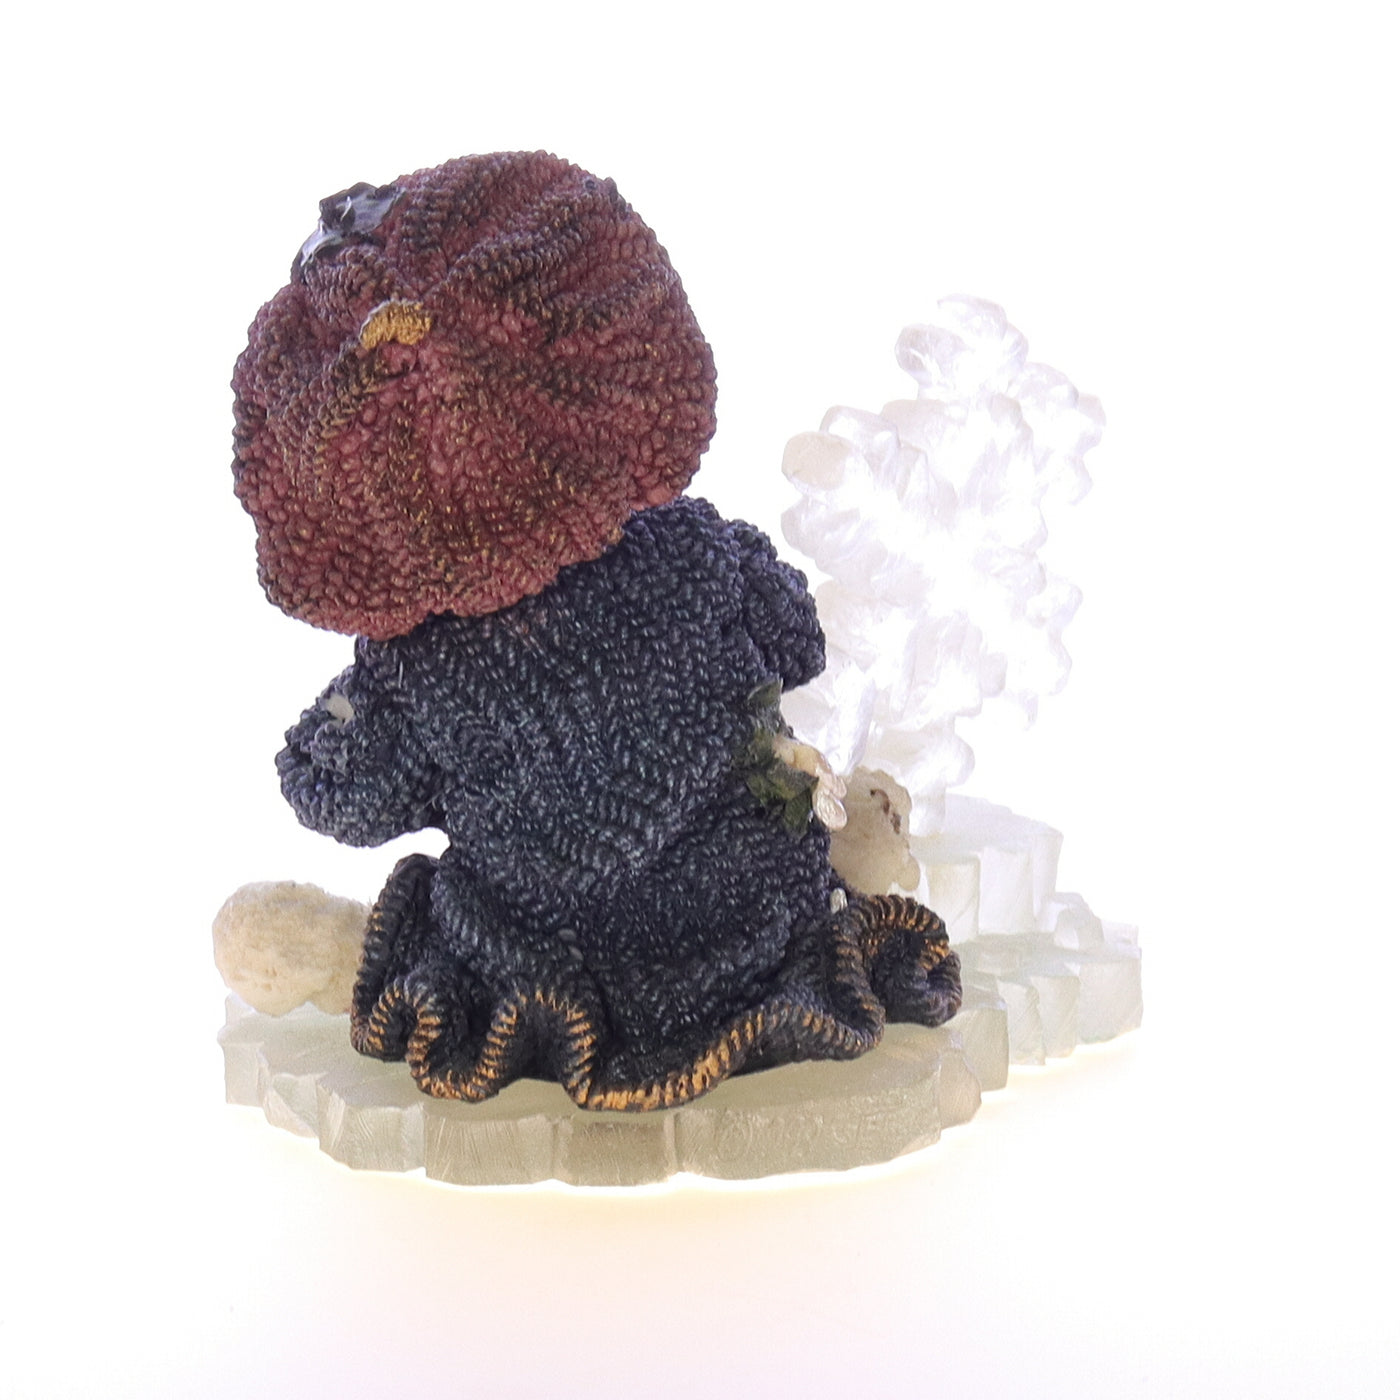 The_Wee_Folkstone_Collection_36504_Flakey_Ice_Sculptor_Christmas_Figurine_1998 Back Left View